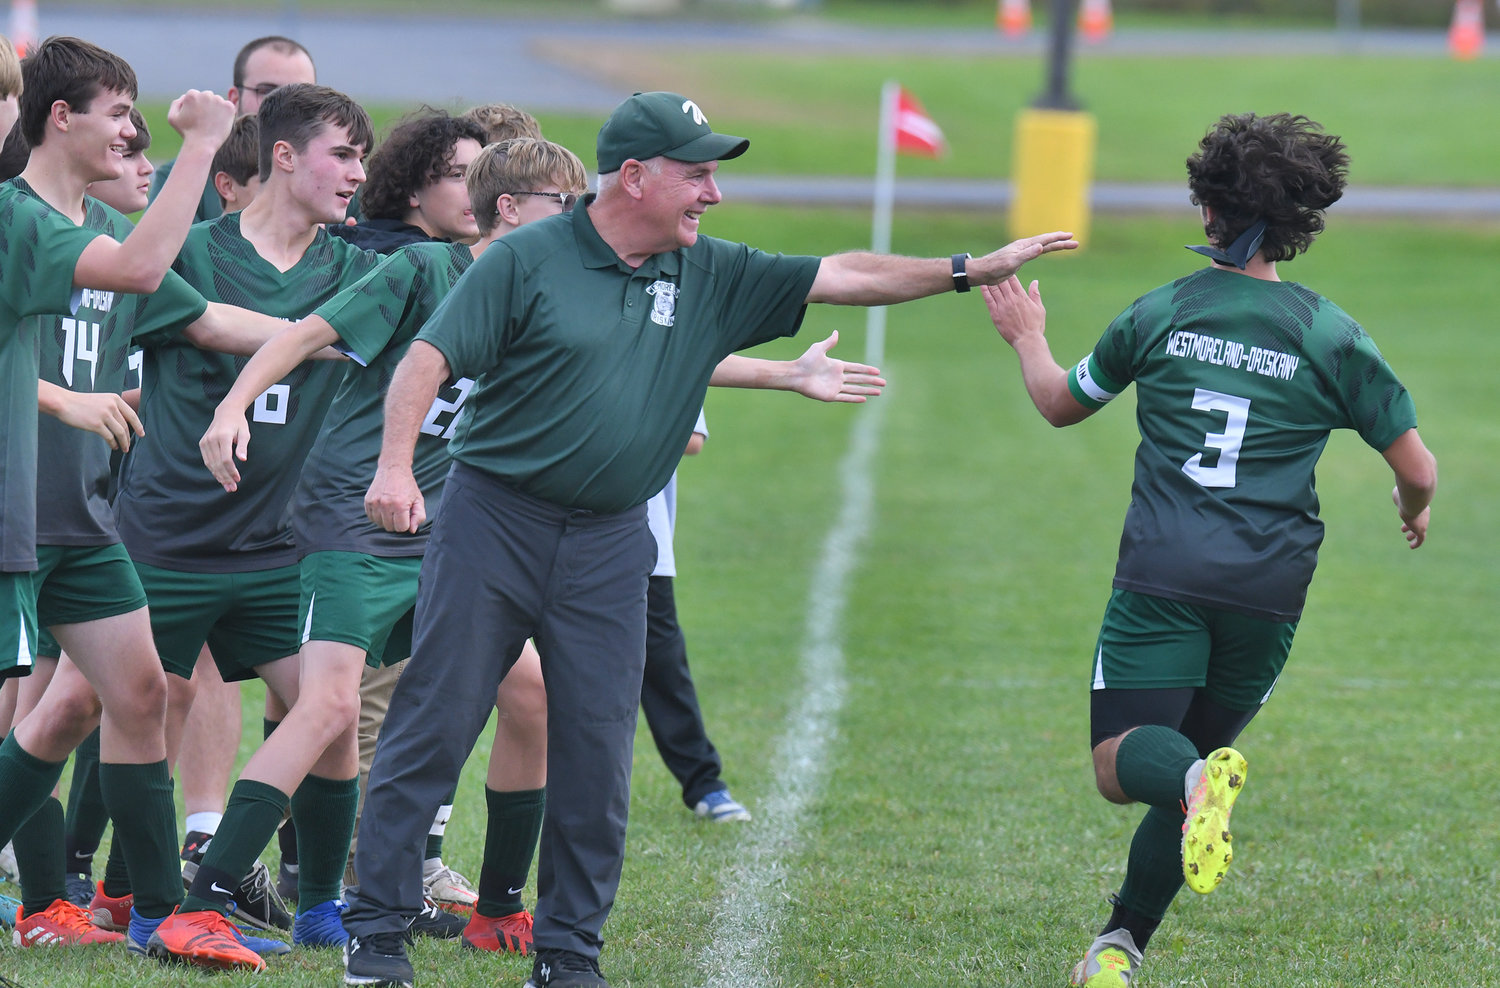 Westmoreland/Oriskany's Jesse Sweet celebrates with the team after scoring the first goal of the game Wednesday afternoon at home against Clinton. Sweet scored again in the second half to break a tie and help the Bulldogs to a 2-1 win. Head coach Gil Palladino is at center.